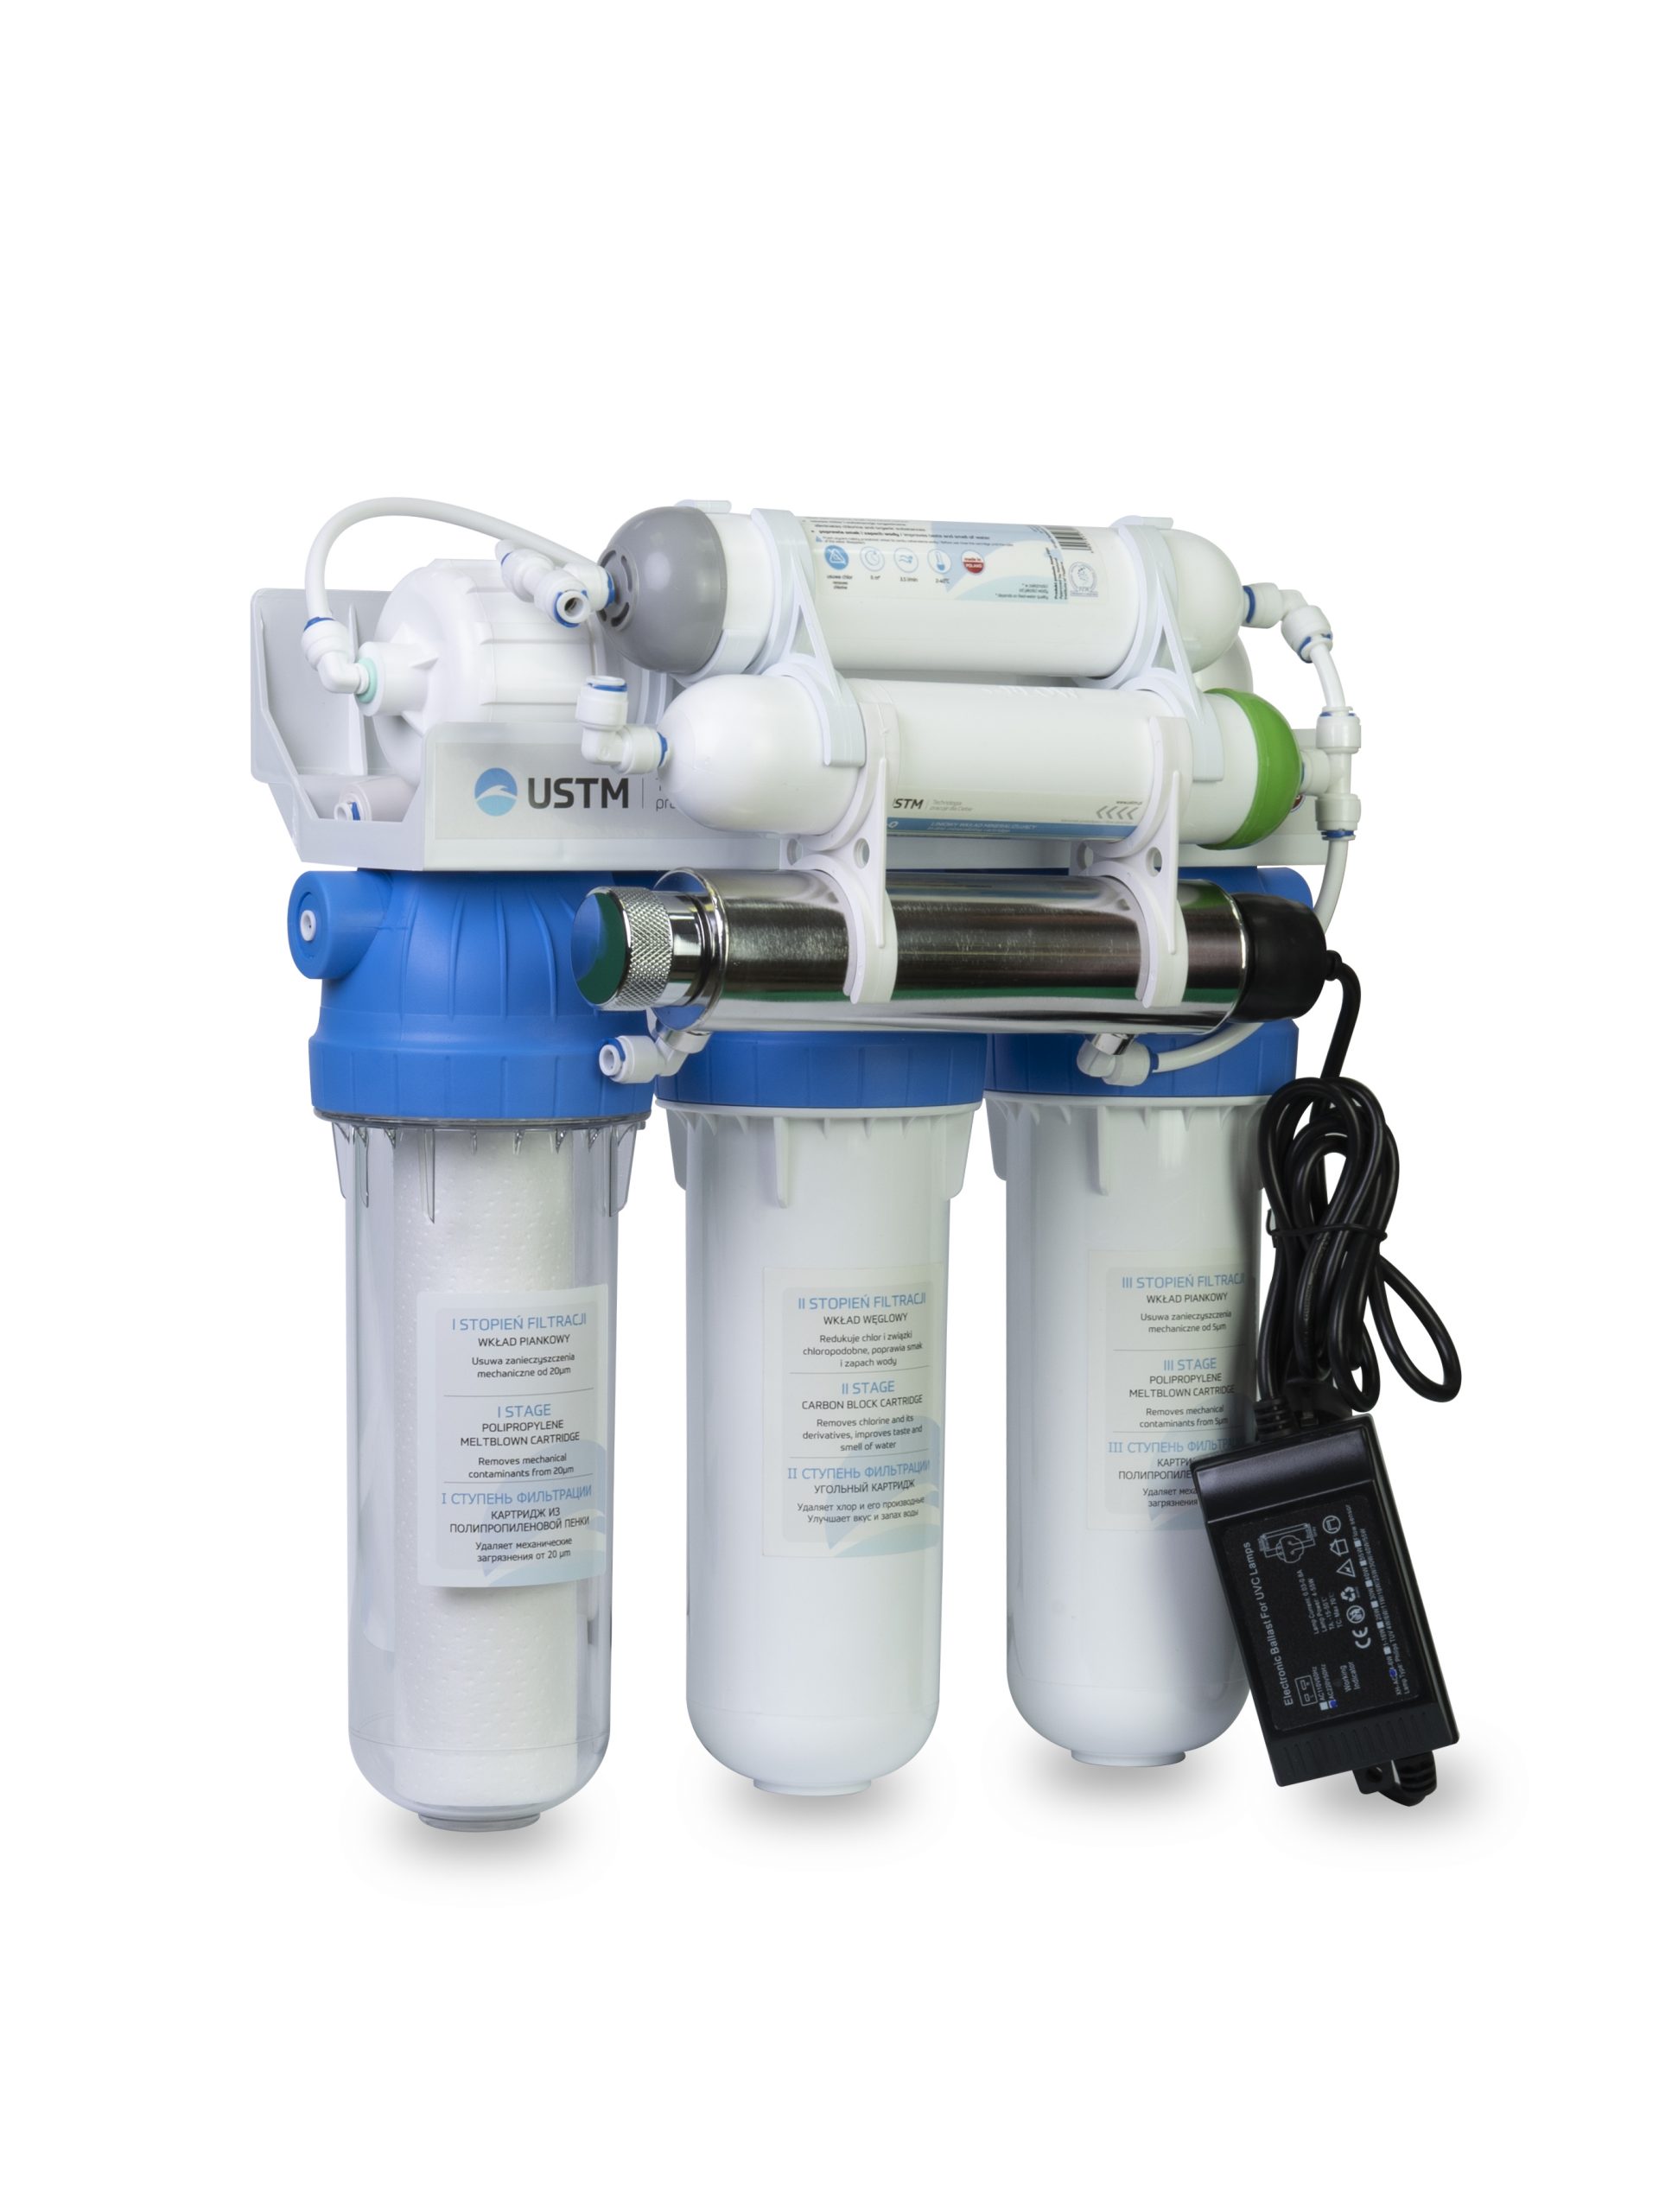 USTM 6 Stage Reverse Osmosis Filtration System, With 75GPD Stable Flow, NSF Certified RO Drinking Water Purification, With Nickel Faucet And Tank, Booster Pump, Plus Under Sink Replacement Filters WITH ULTRA VIOLET LAMP